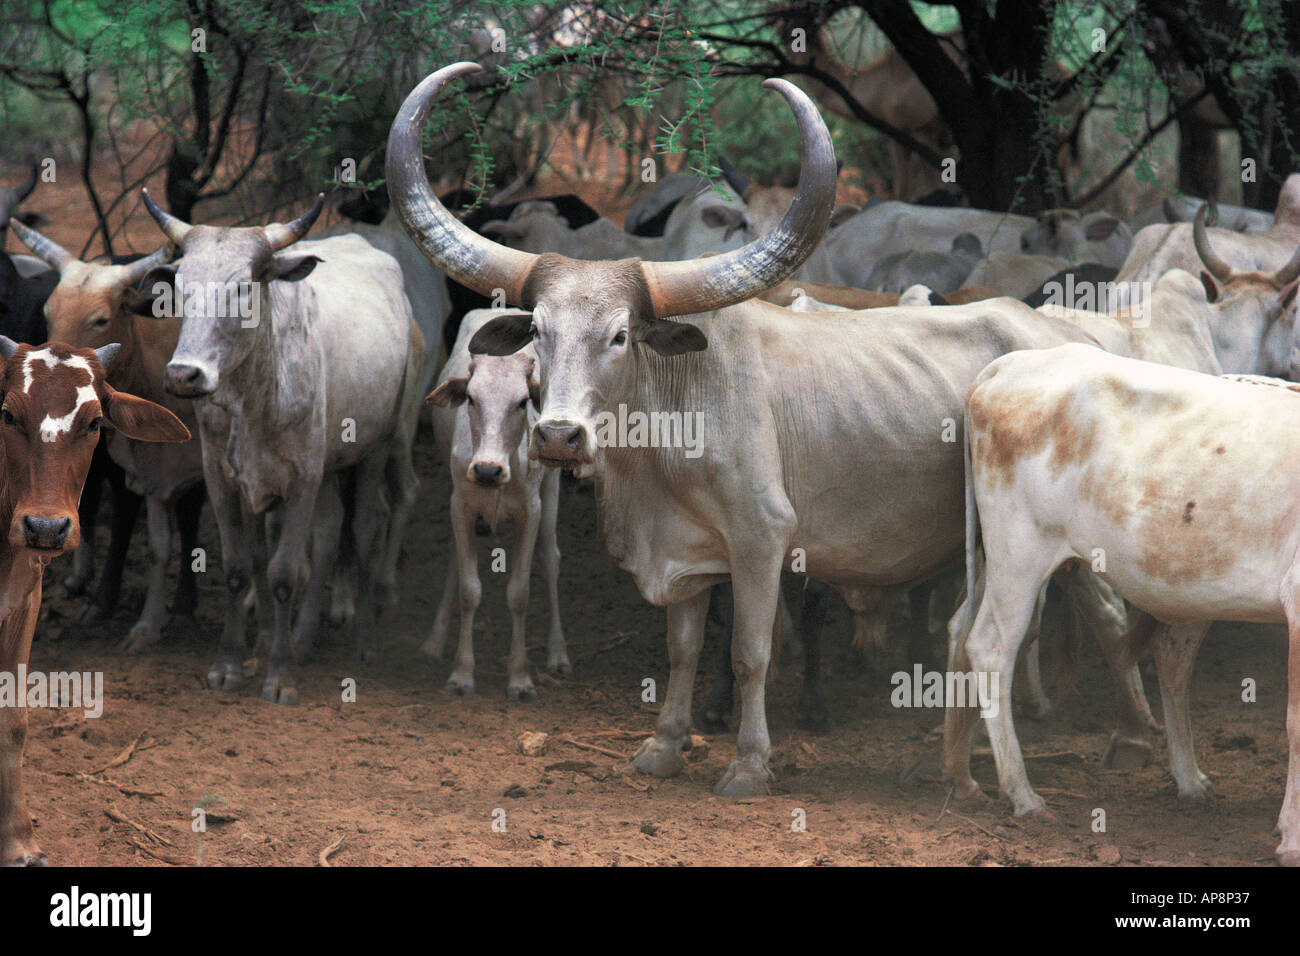 Cattle owned by Samburu people The bull has magnificent horns which makes it highly prized Northern Kenya East Africa Stock Photo